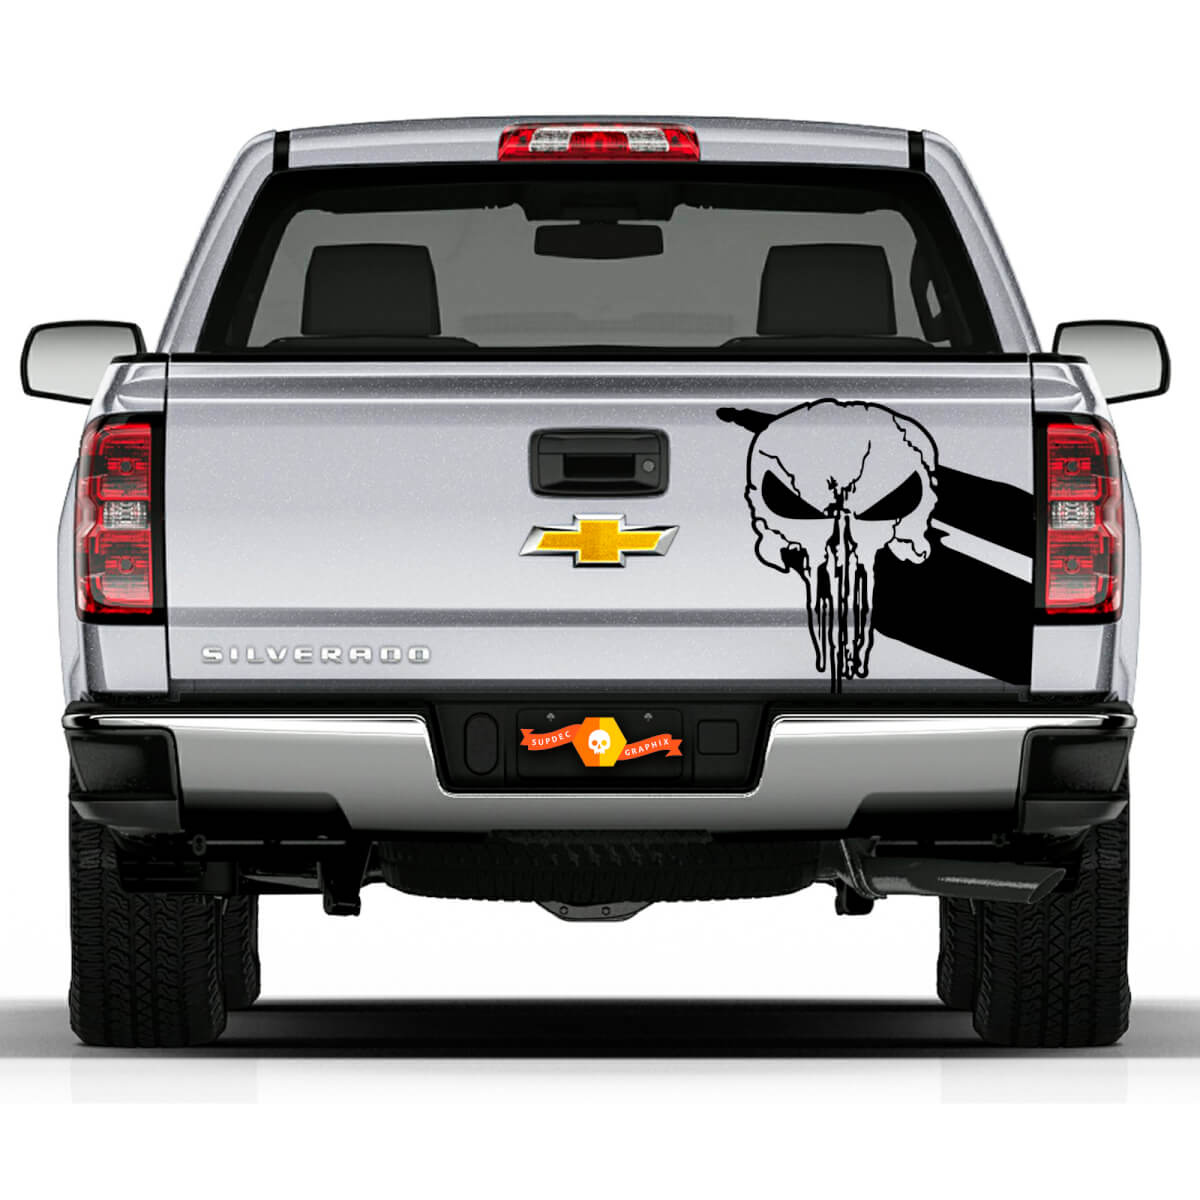  Tailgate Skull Distressed Grunge Design Car Bed Pickup Vehicle Truck Vinyl Graphic Decal 